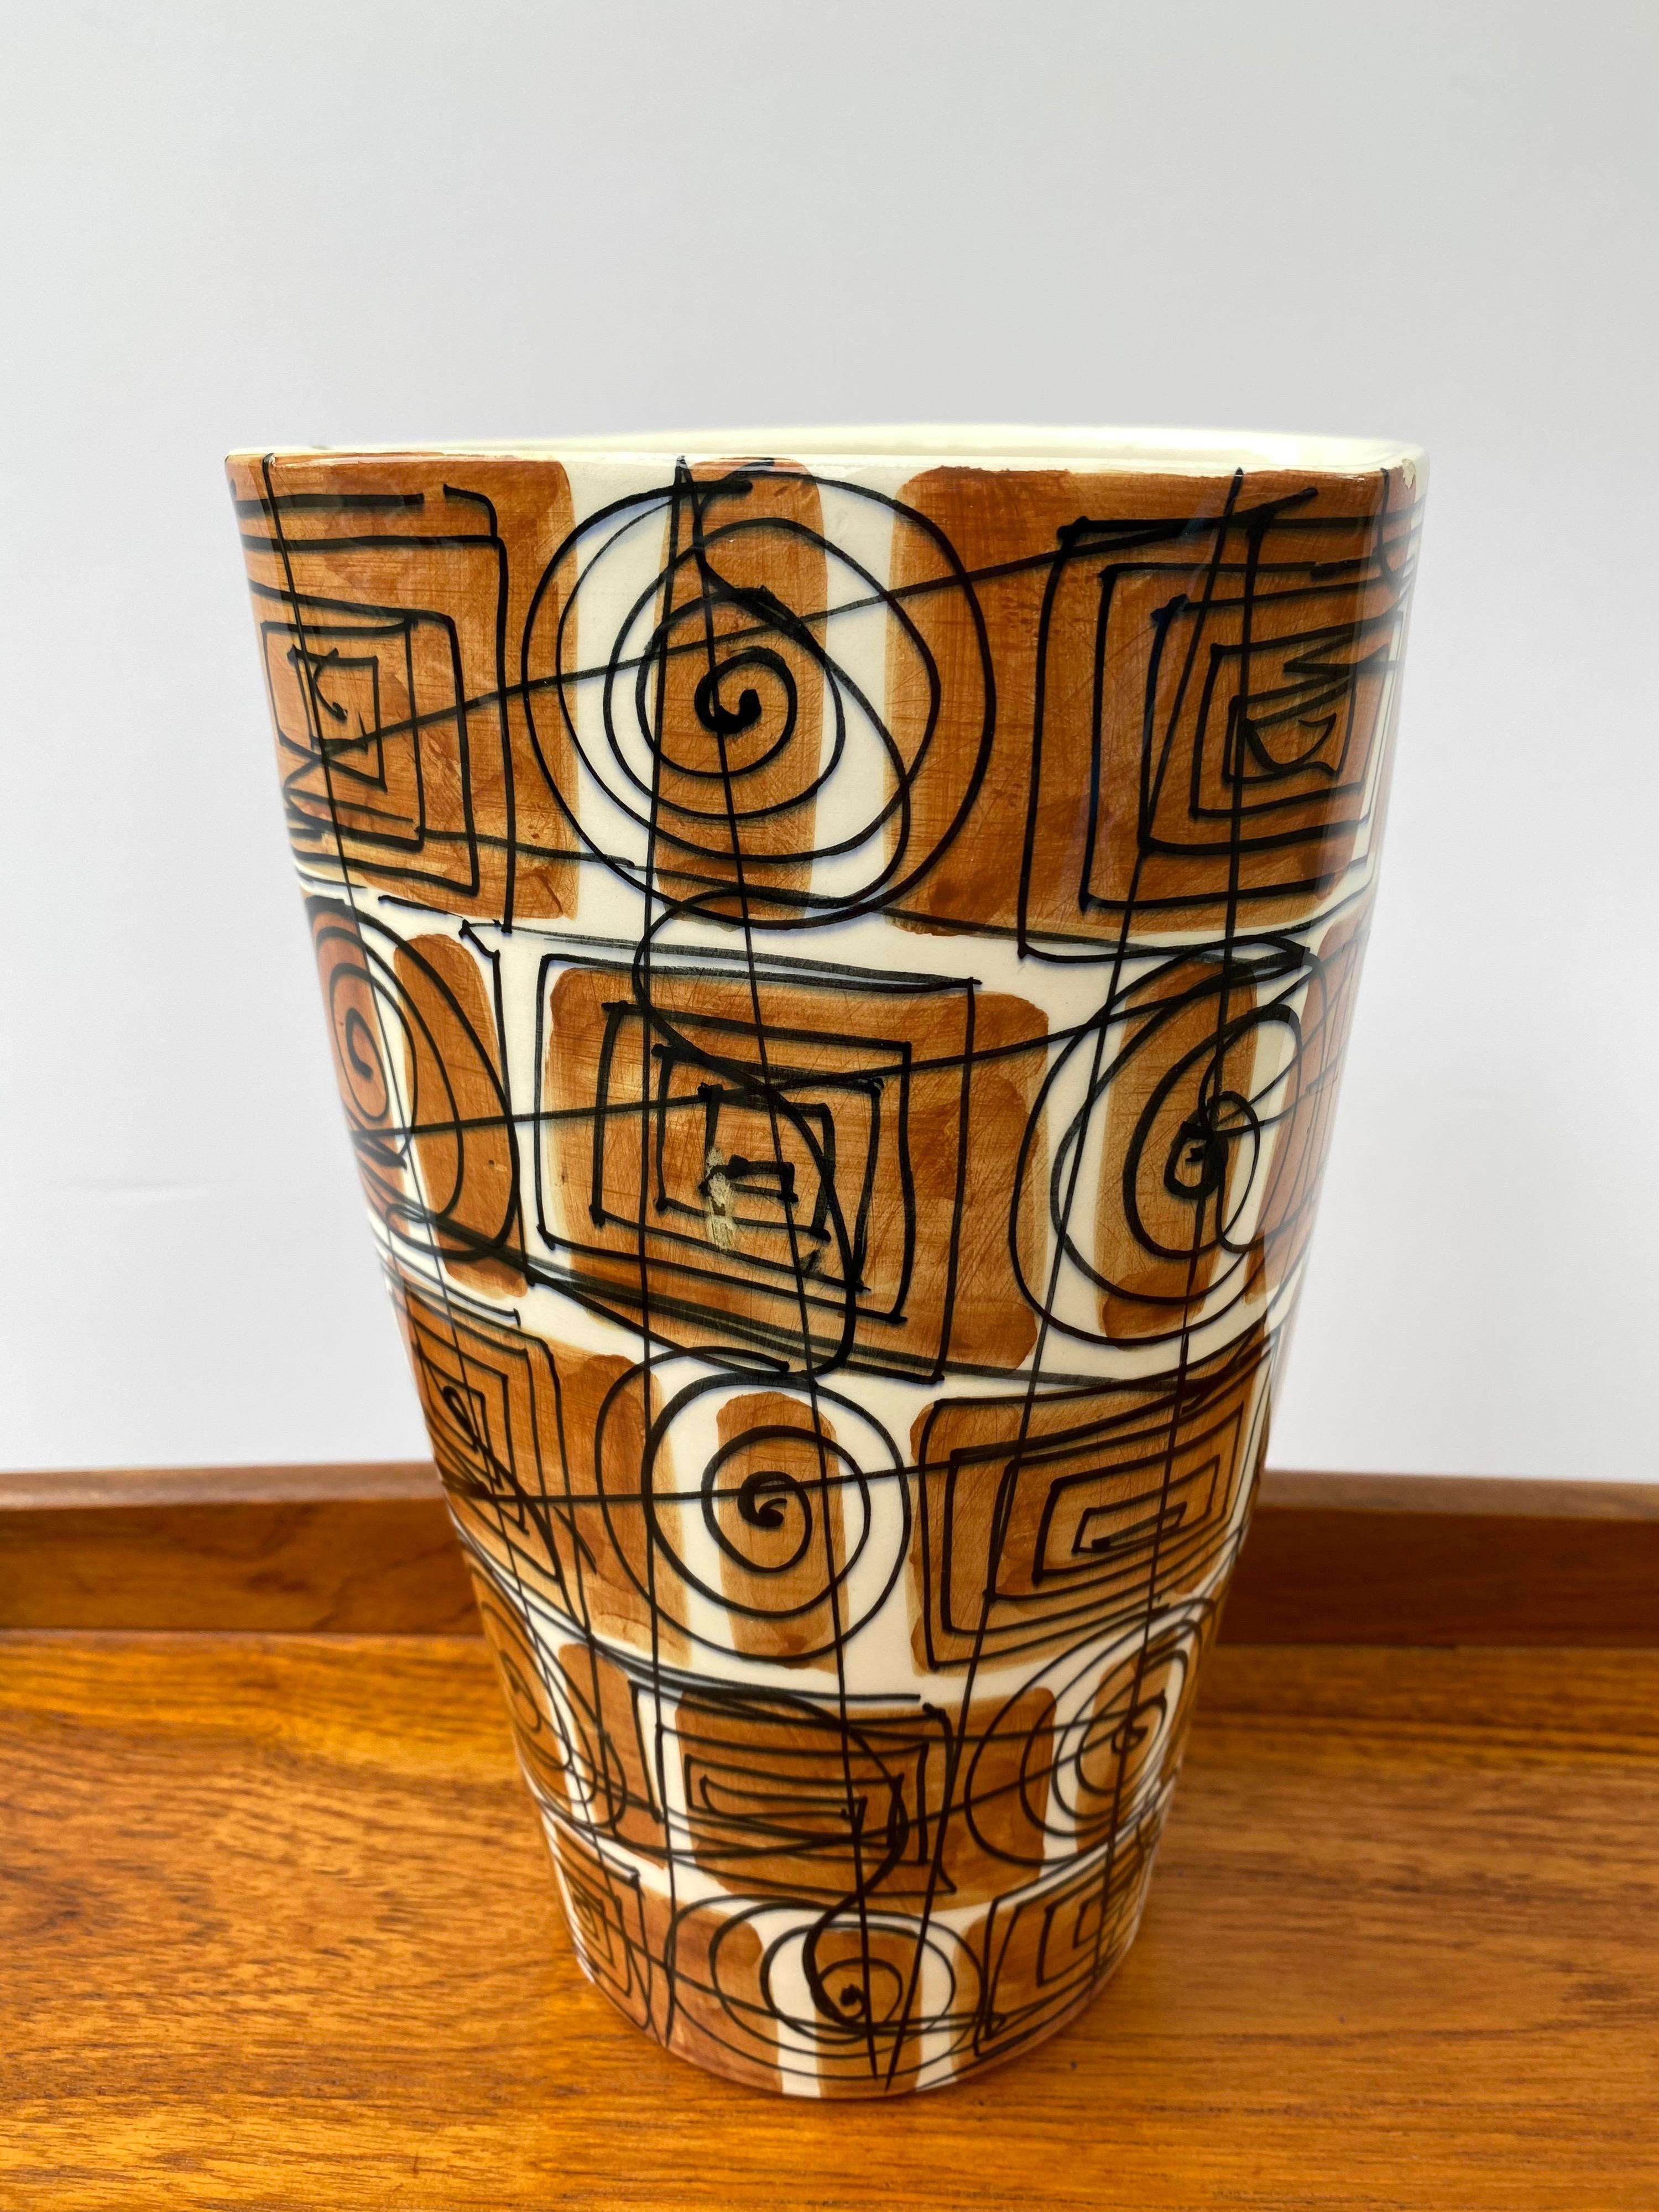 Italian ceramic vase for Raymor. Abstract black circle design over areas of brown. 9.5